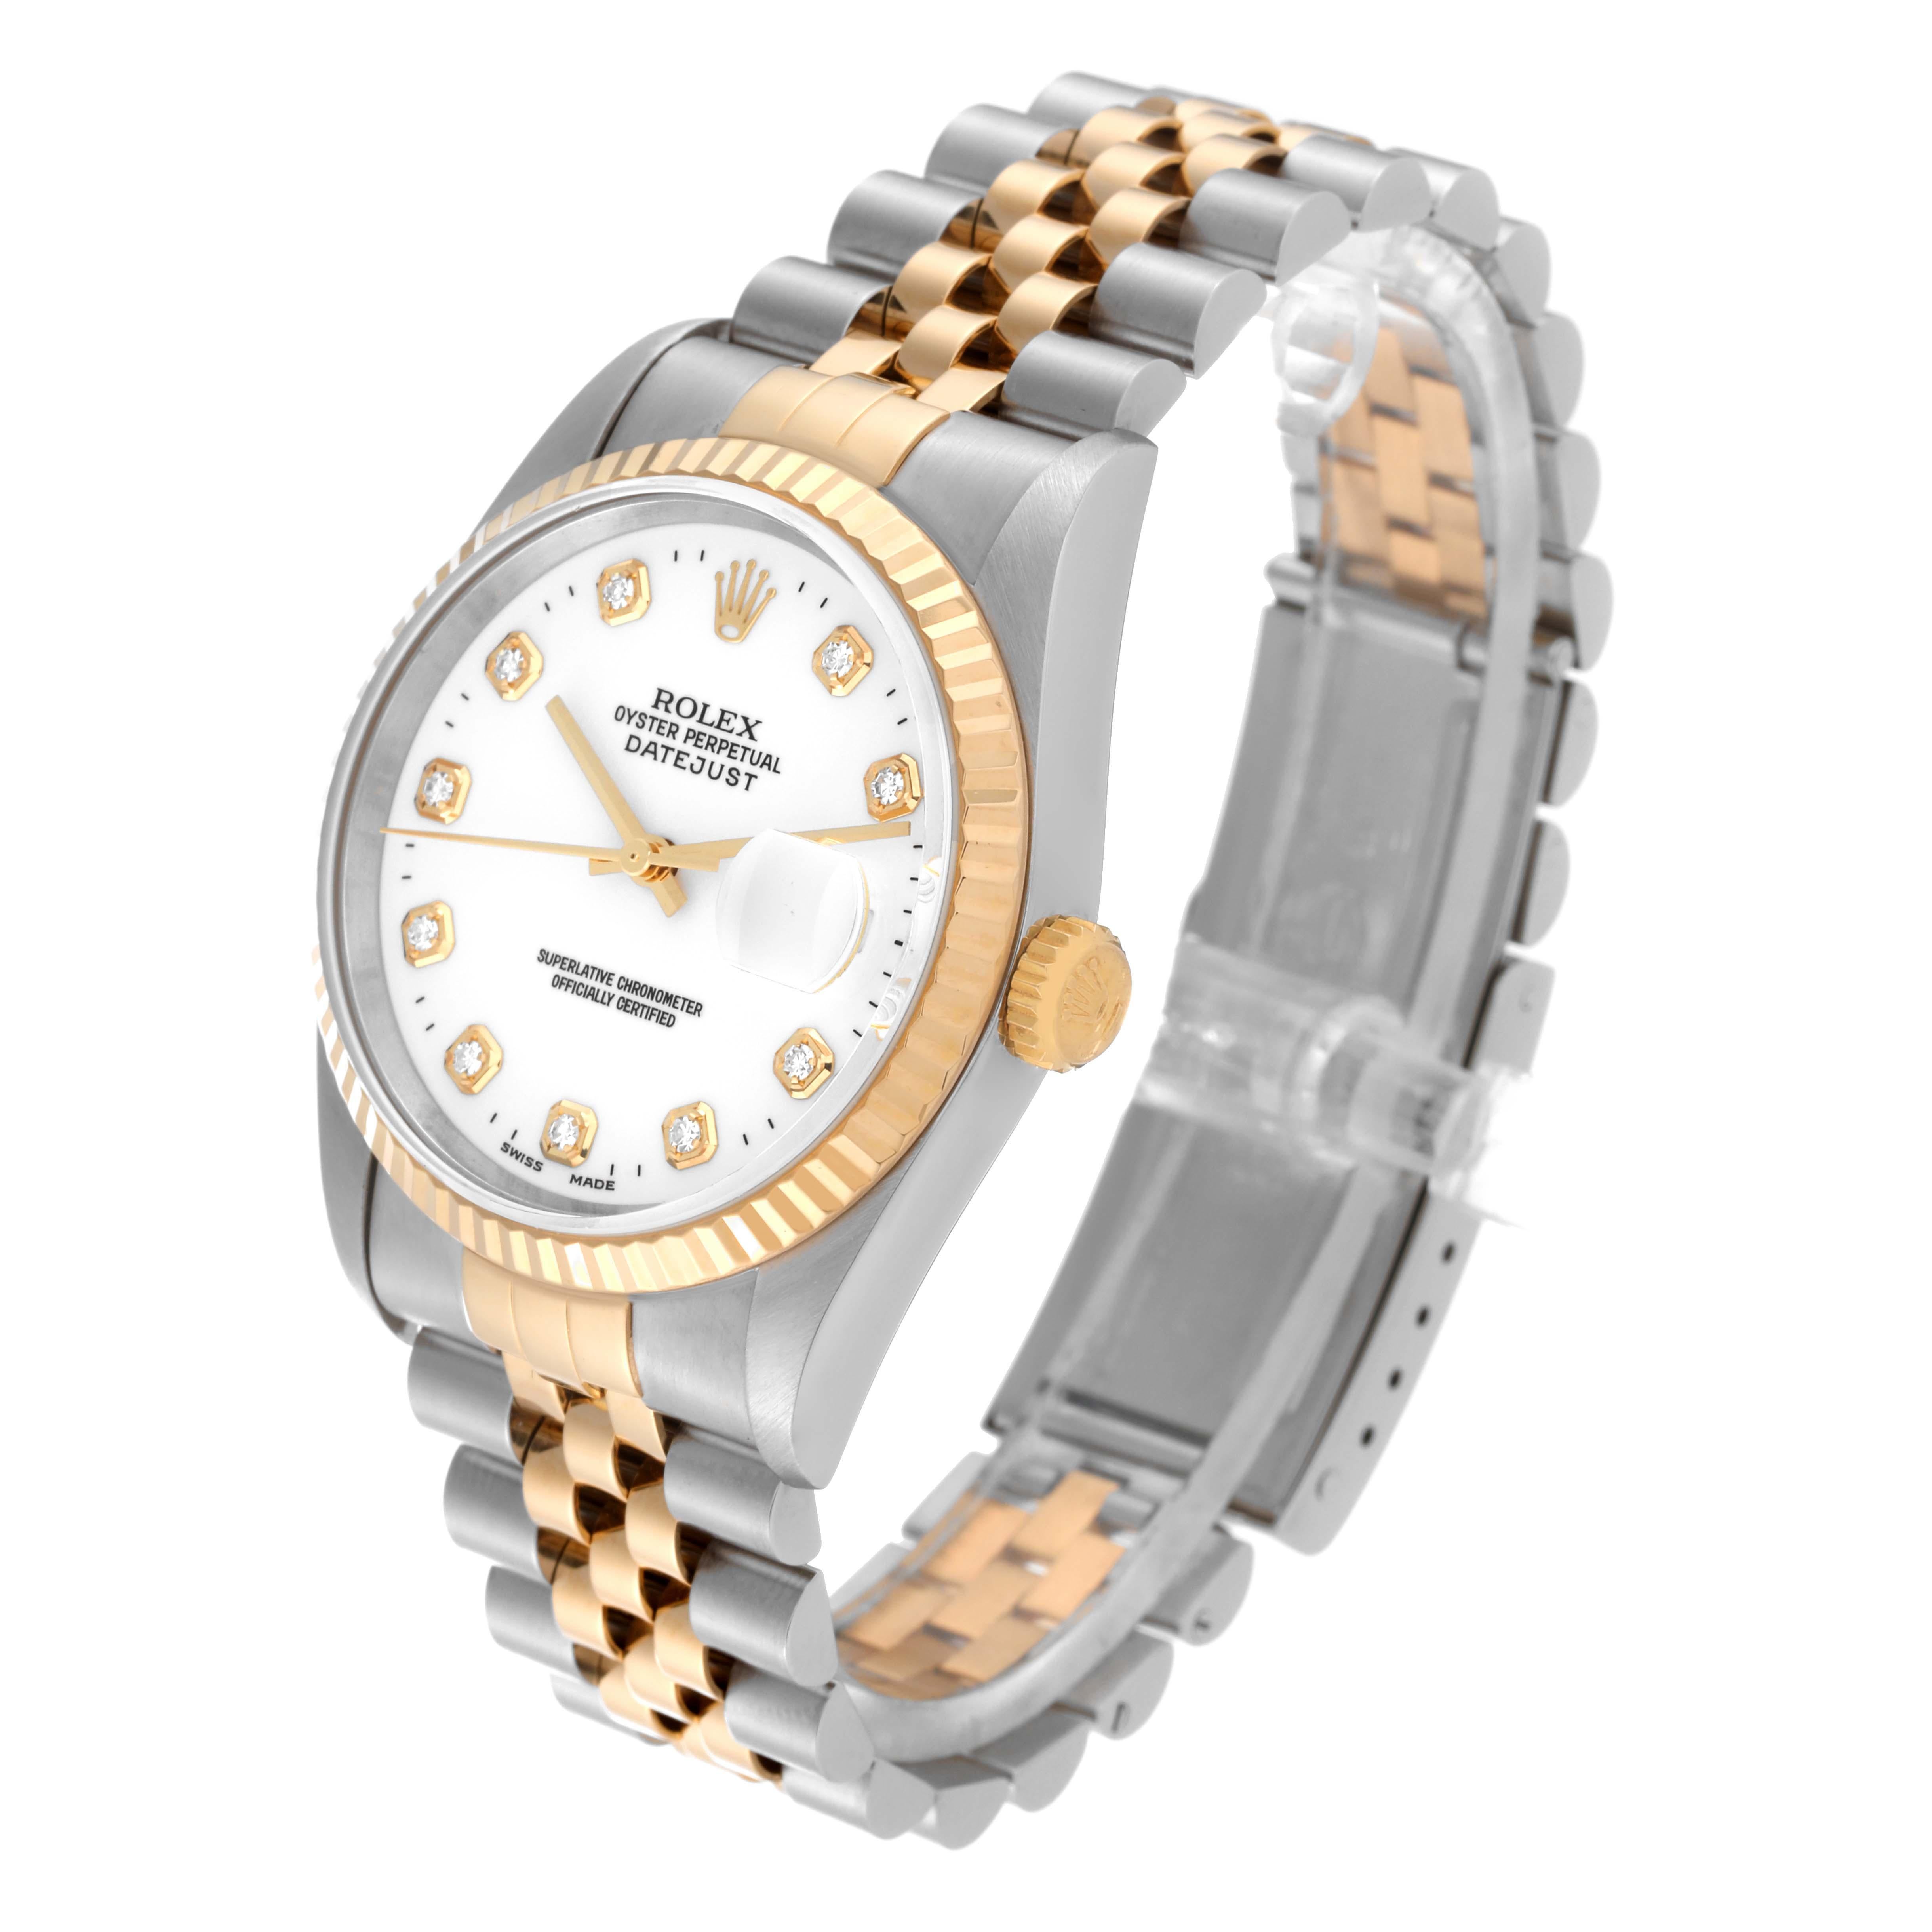 Rolex Datejust Diamond Dial Steel Yellow Gold Mens Watch 16233 For Sale 3